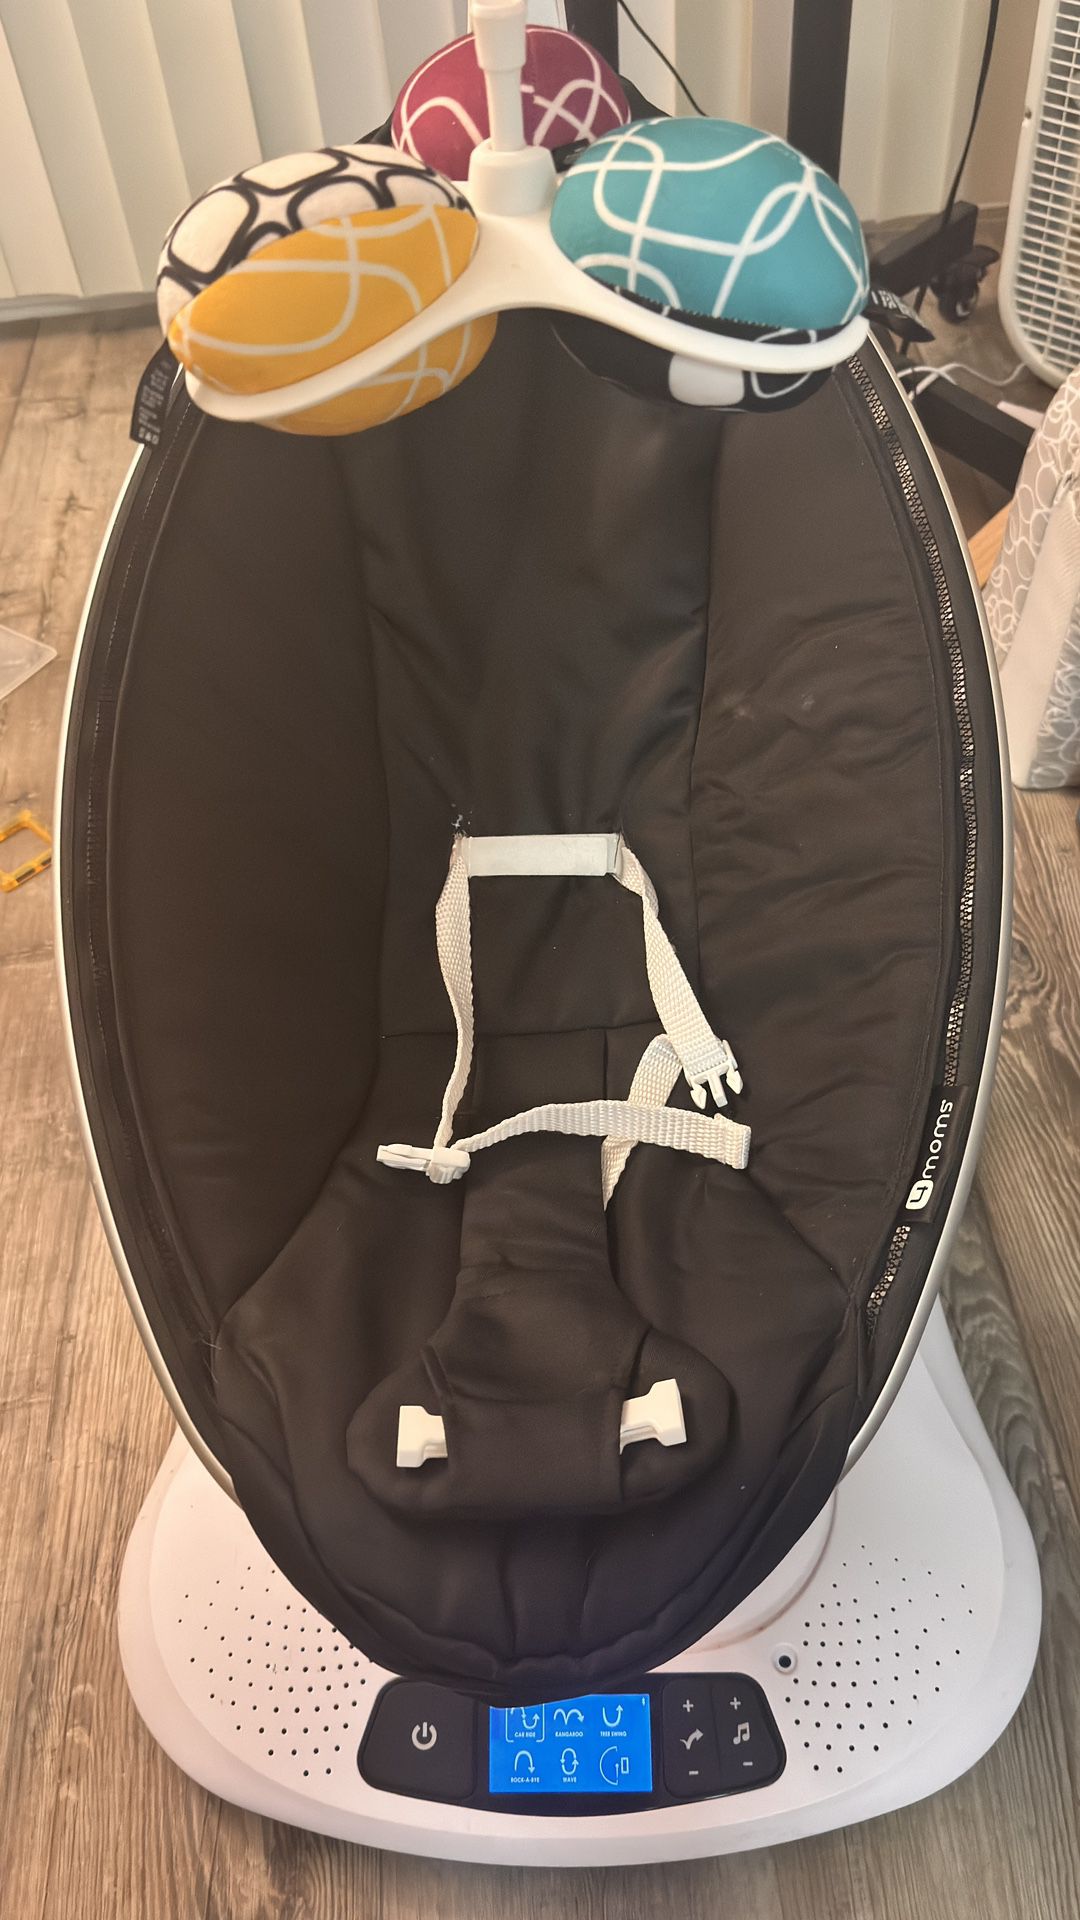 4moms Mamaroo (5 Multi-motion Baby Swing) PRE OWNED